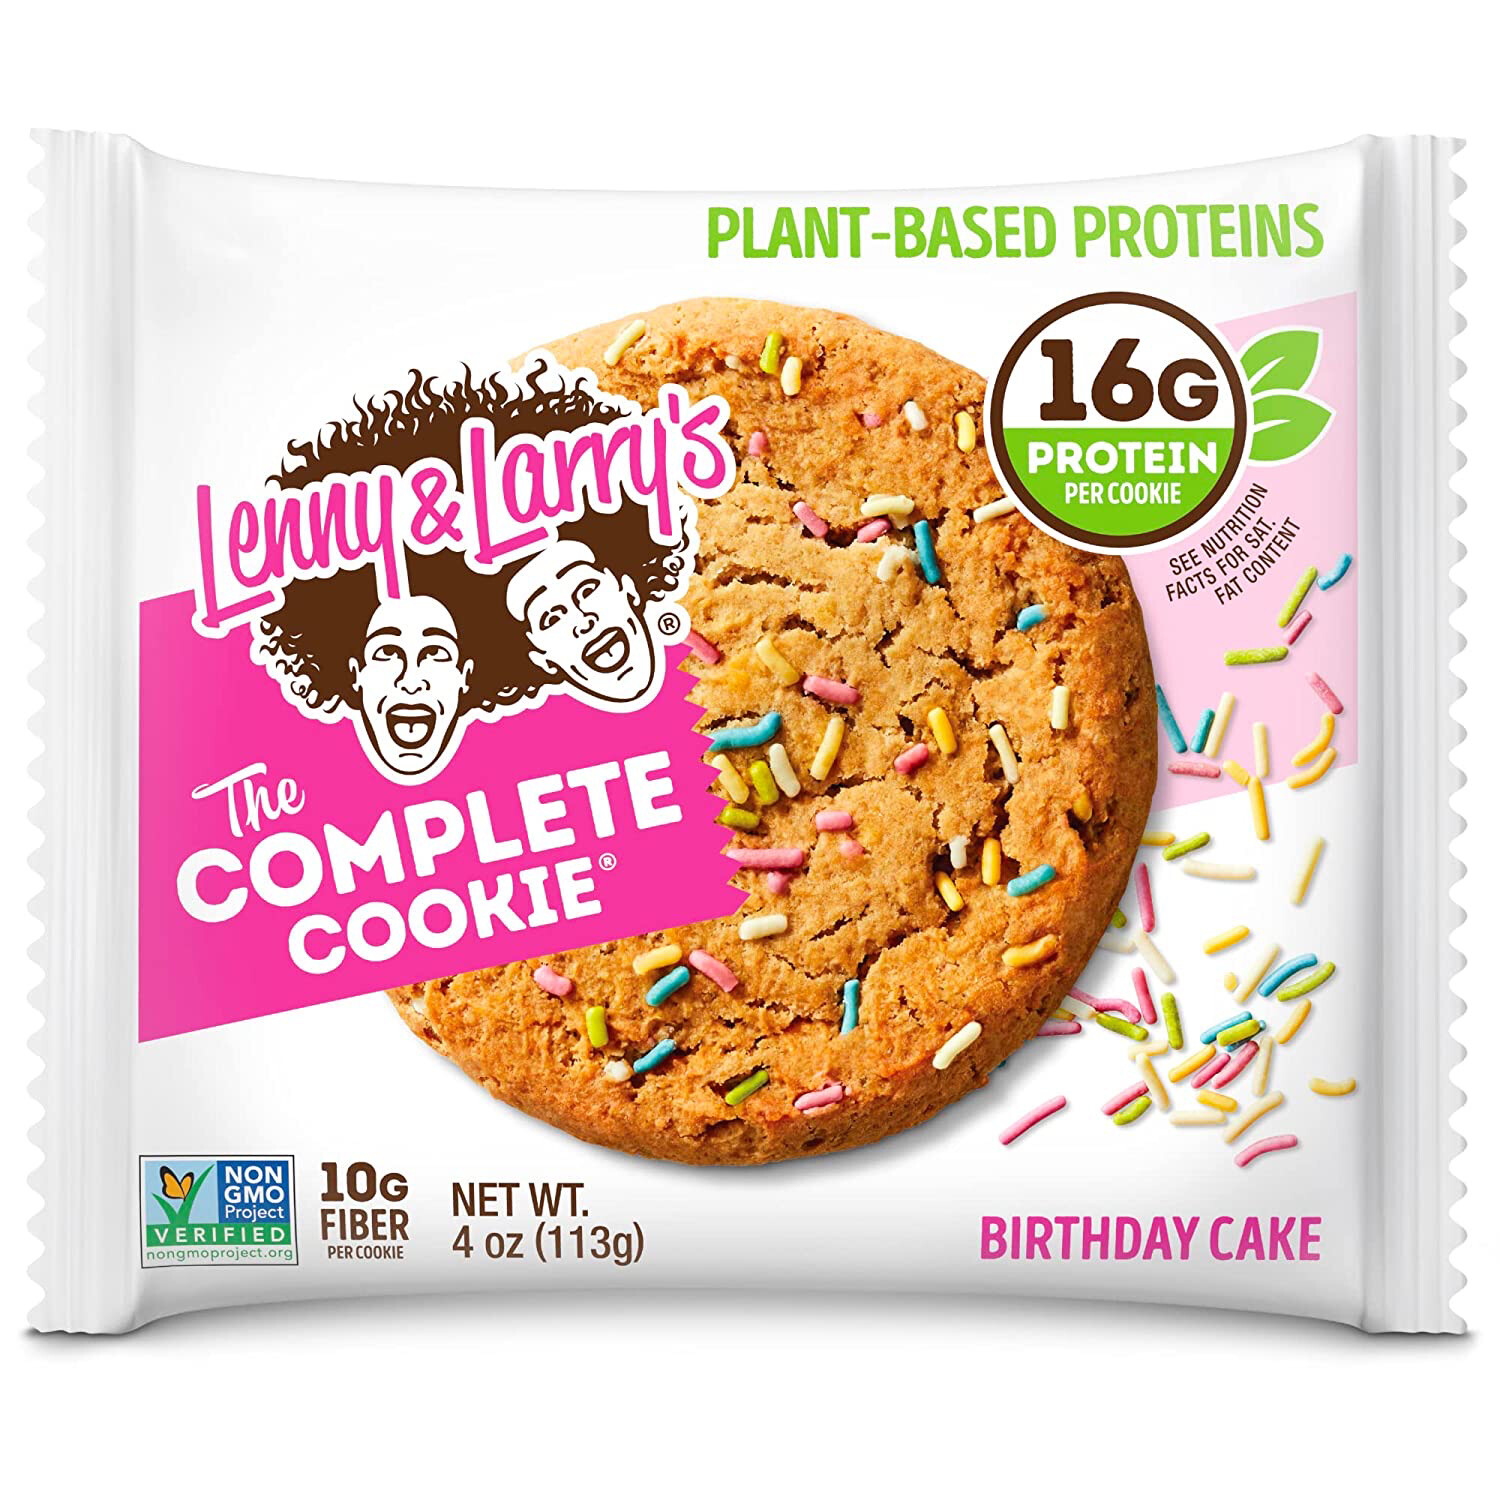 Lenny & Larry’s The Complete Cookie Birthday Cake Plant Based 16 g Protein Vegan 